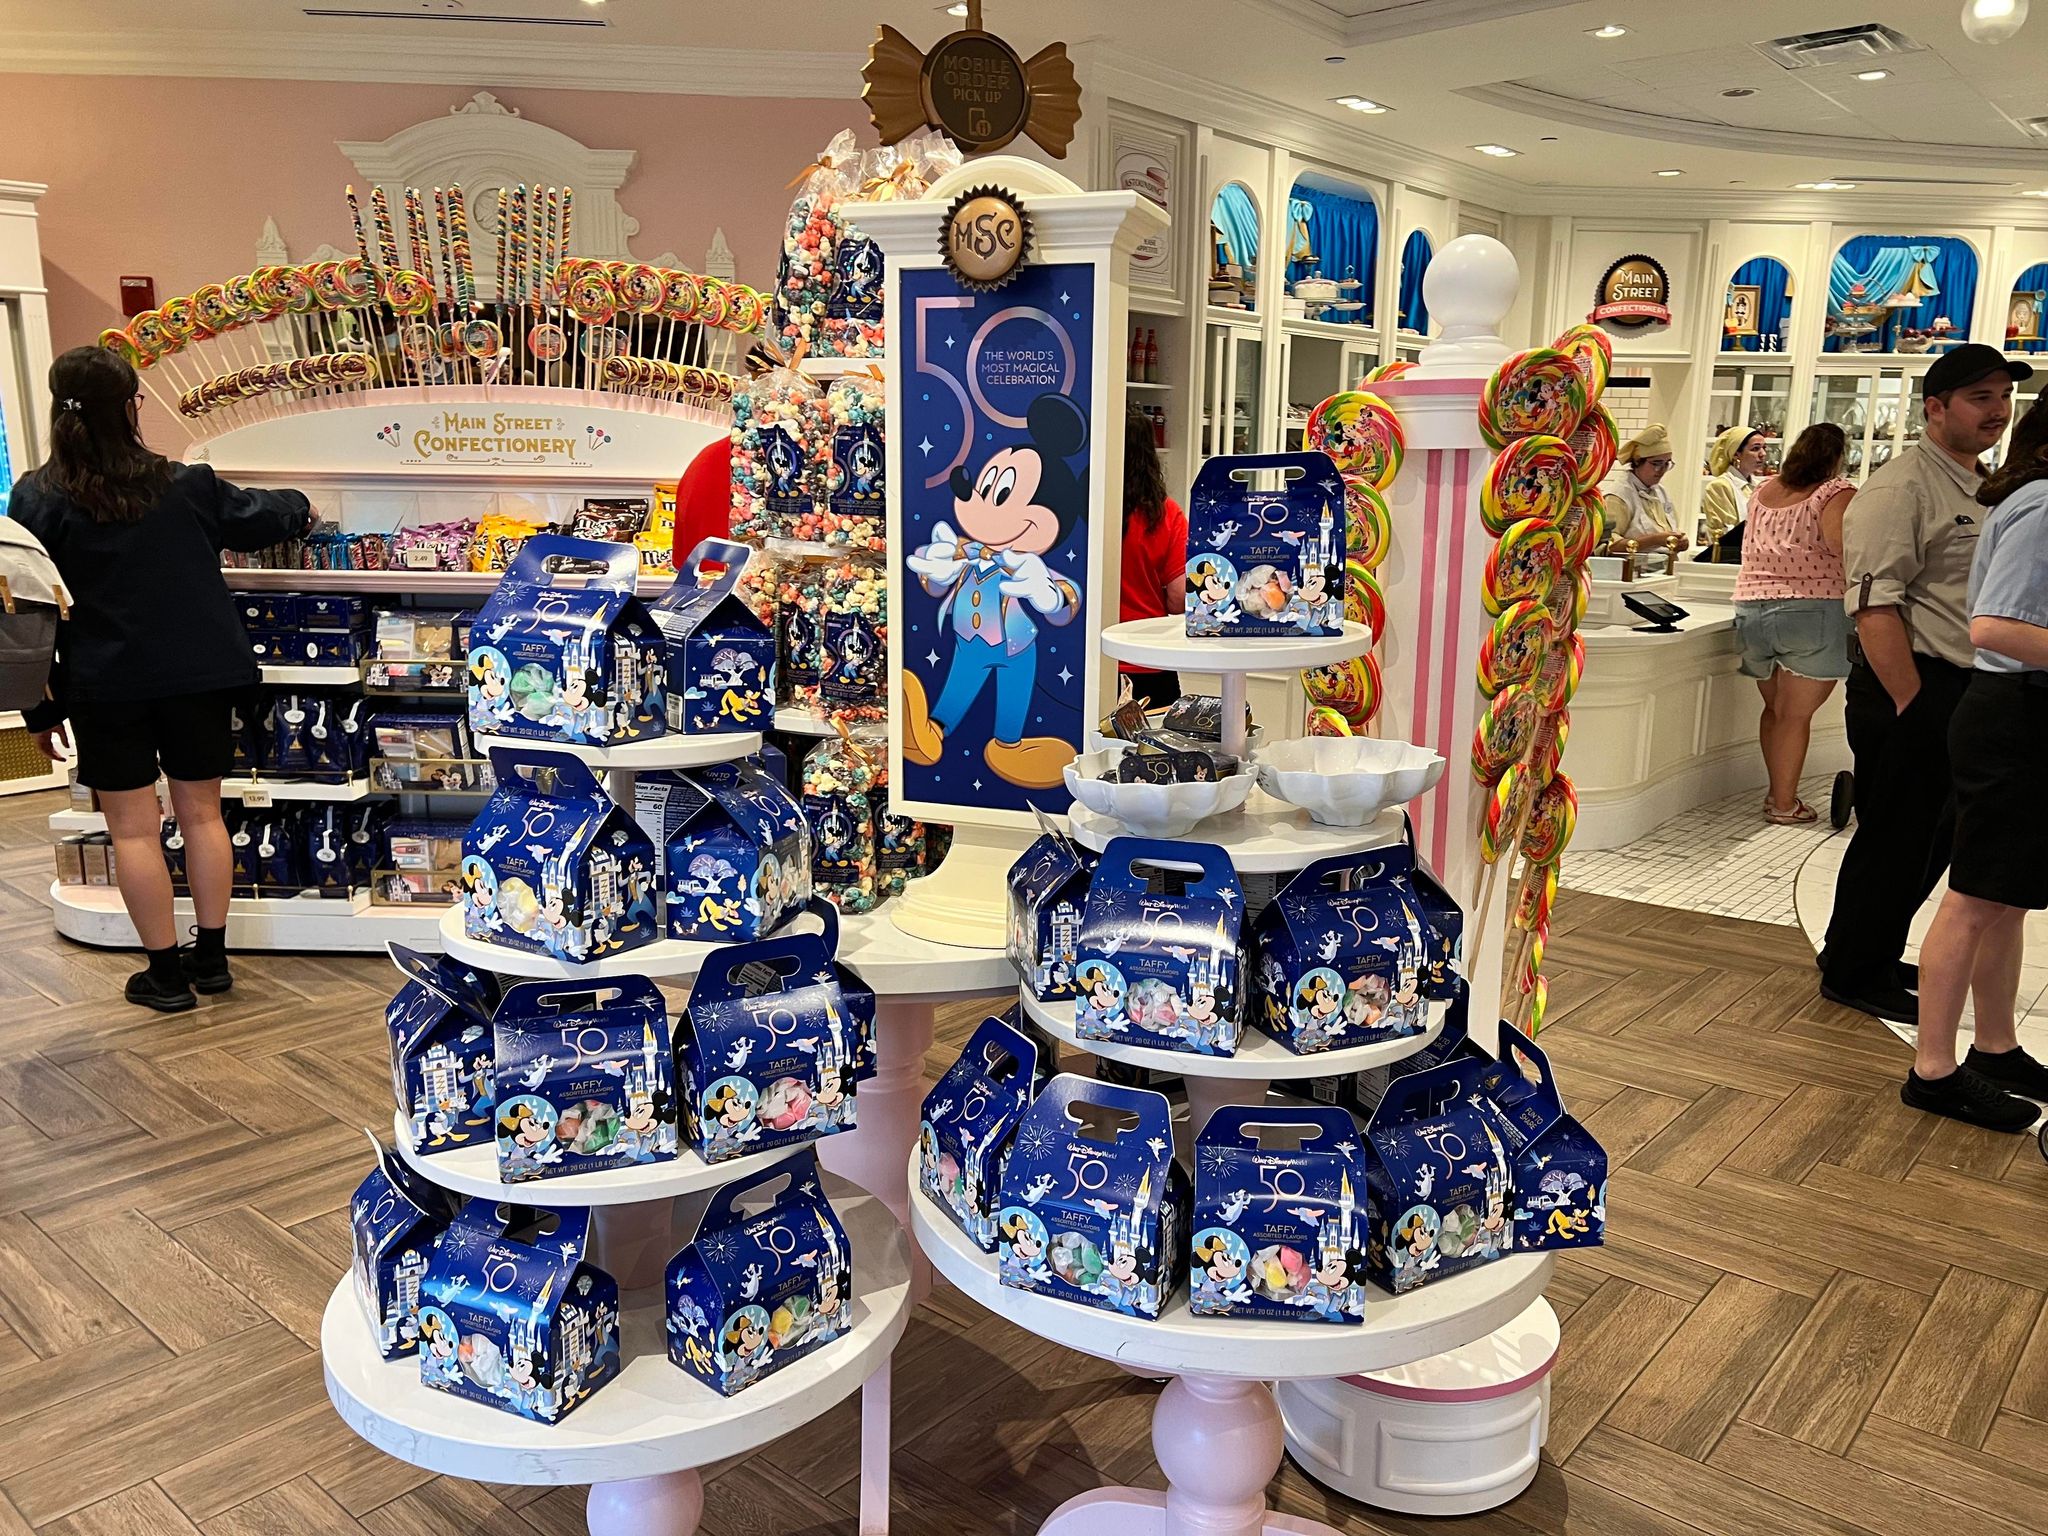 See What's Cooking In the Beautifully Remodeled Main Street Confectionary Magic Kingdom 12